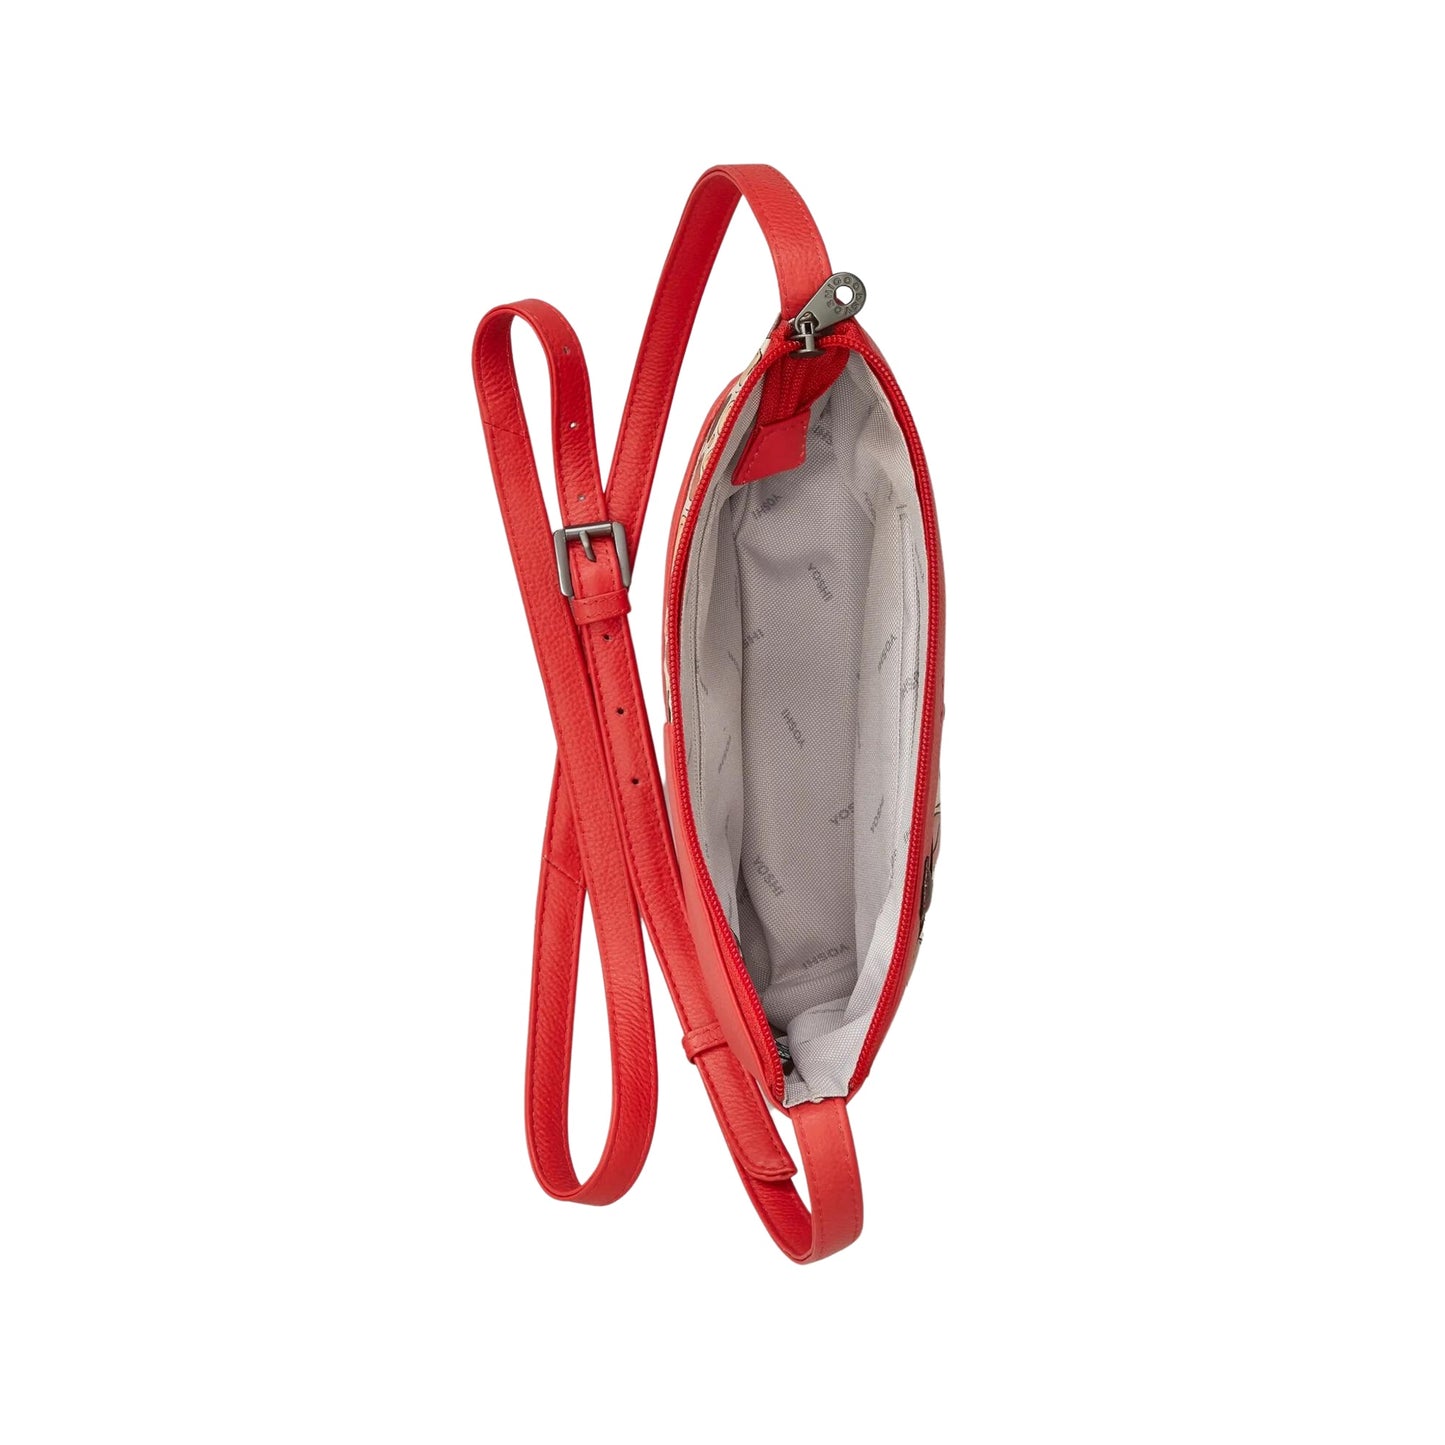 Mother's Pride Leather Crossbody Bag - Red